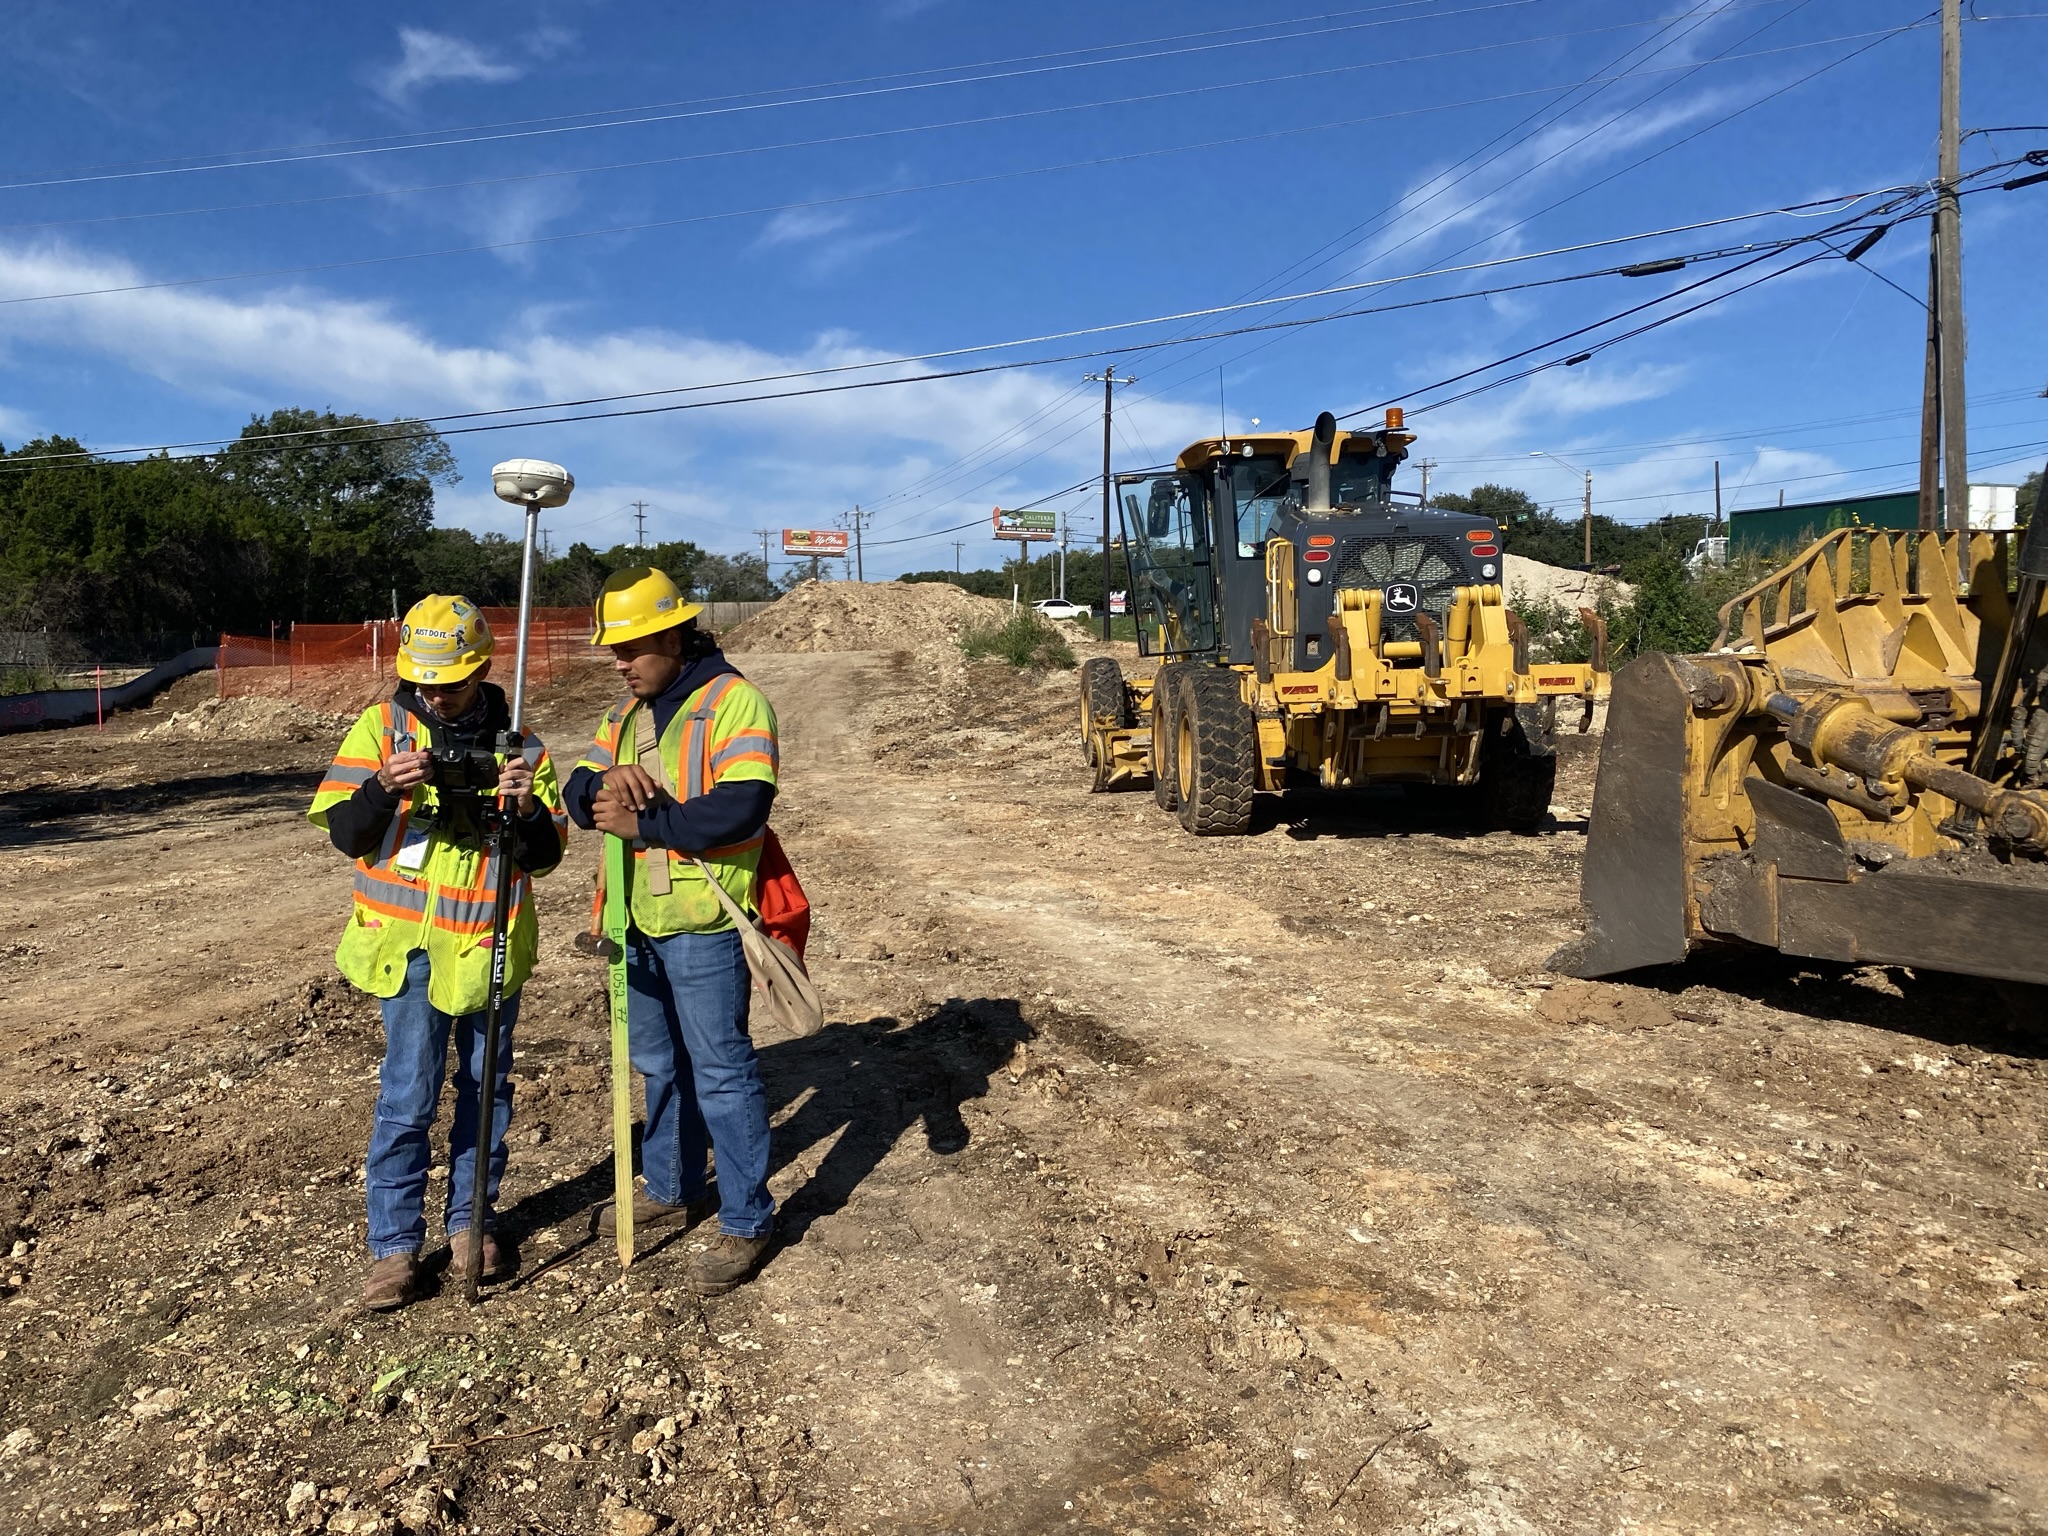 Our surveyors use a GPS stick to pinpoint job site coordinates. This helps the construction crew follow the boundaries of detailed engineering plans. October 2021